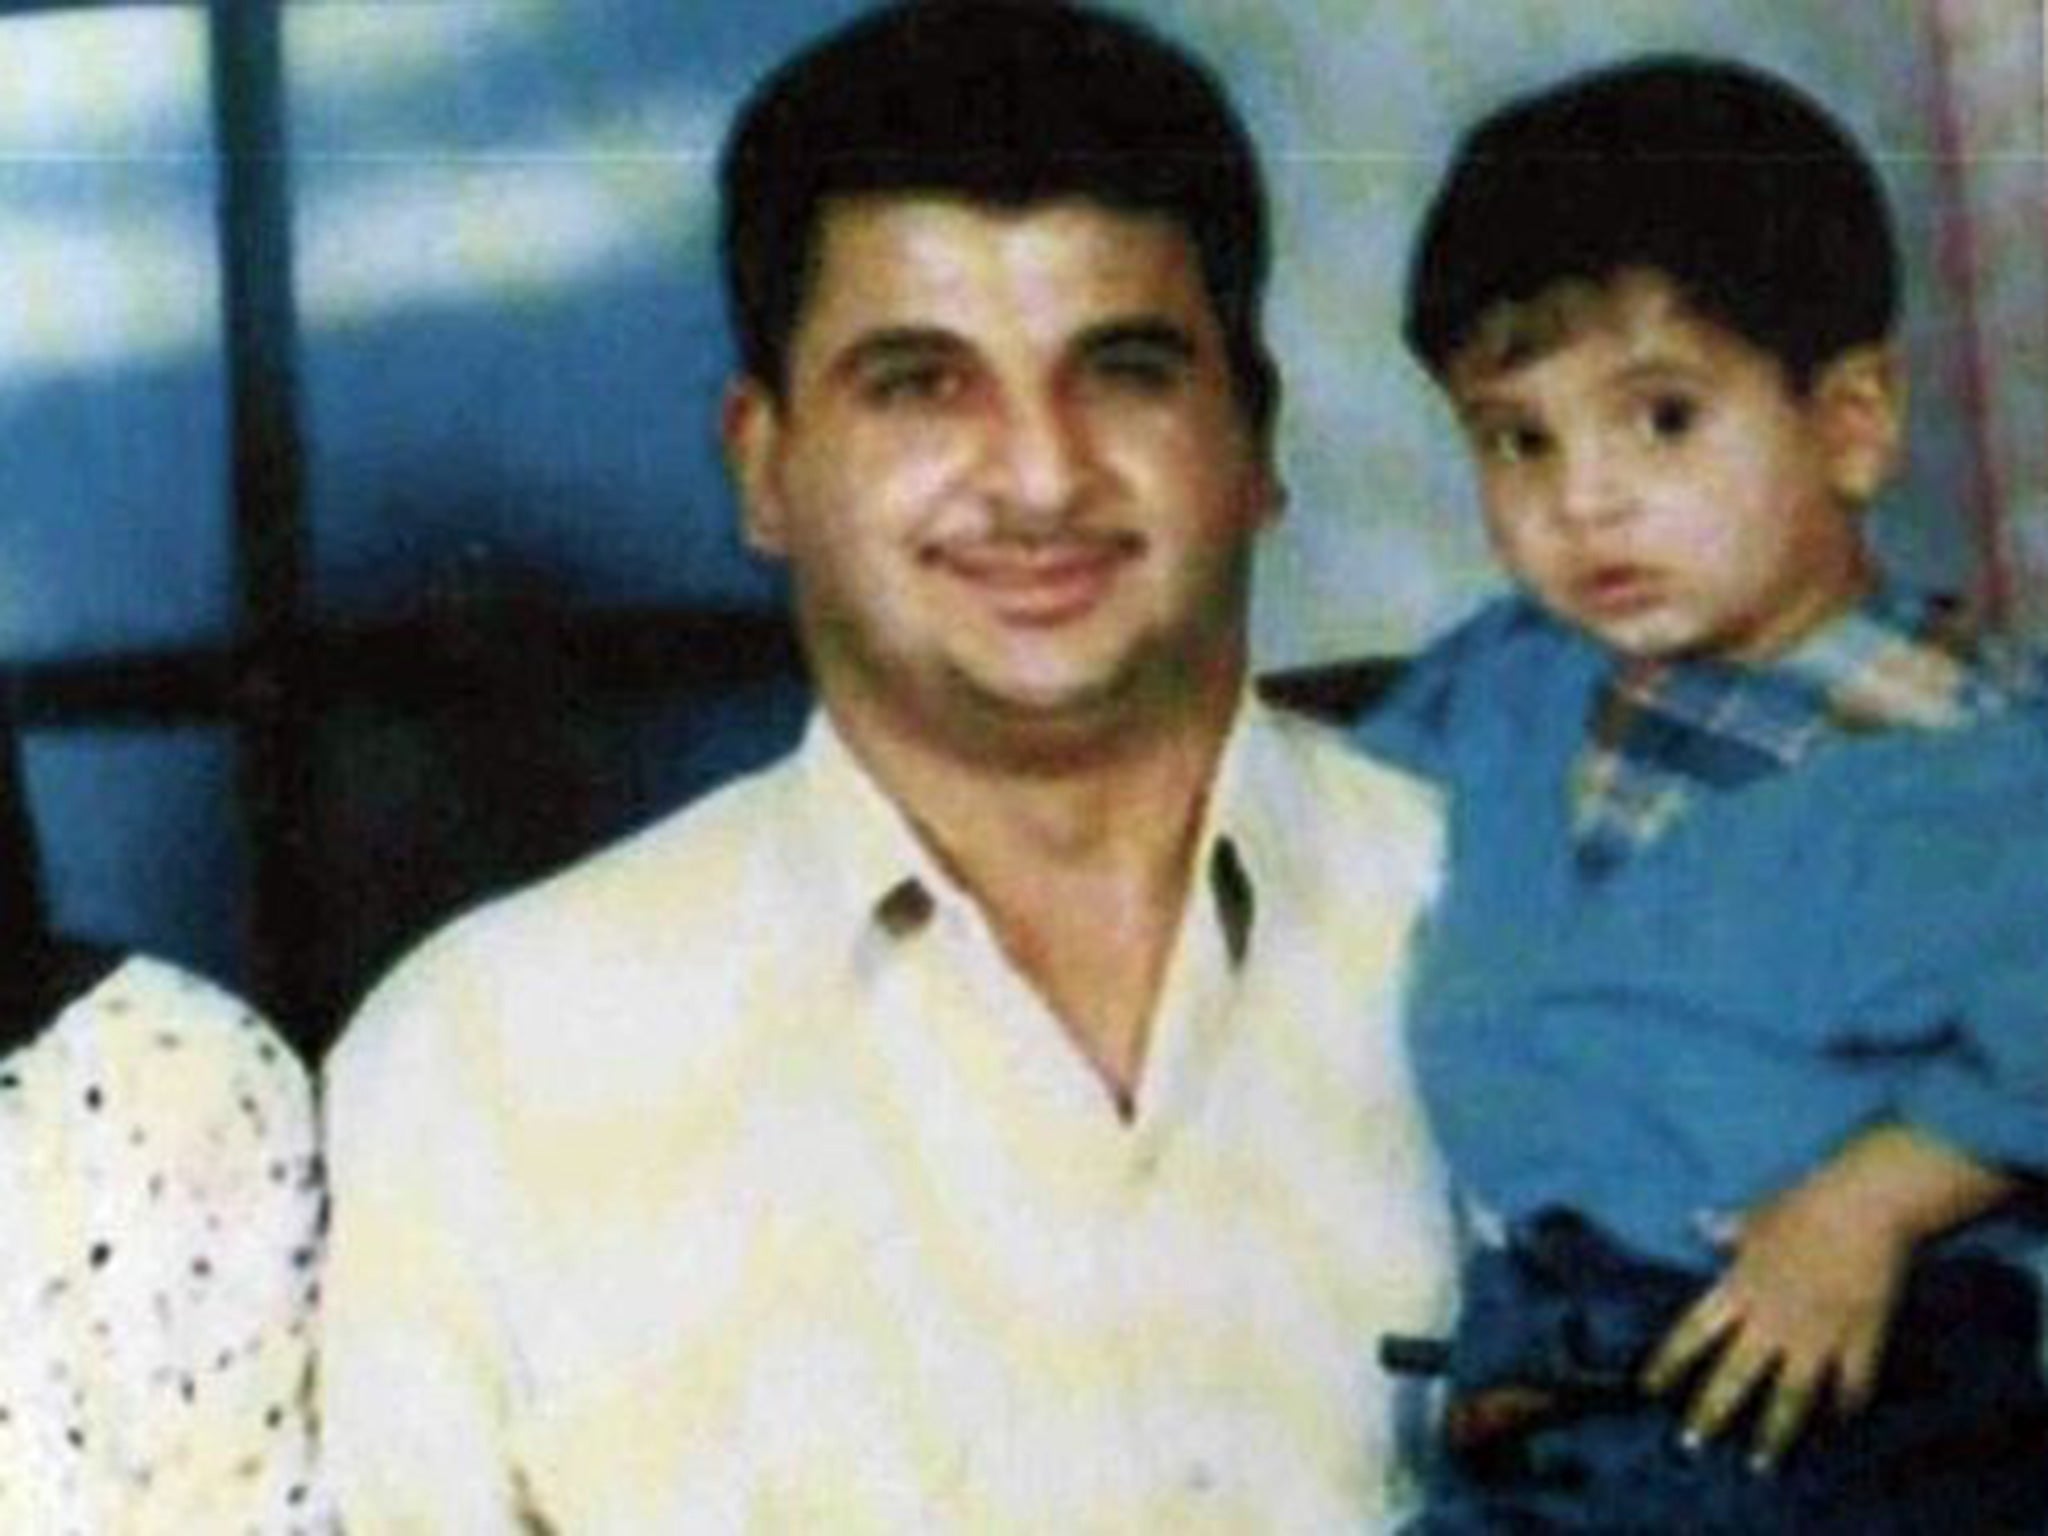 Hotel worker Baha Mousa, who ied in 2003 while in British custody in Iraq, pictured with his son